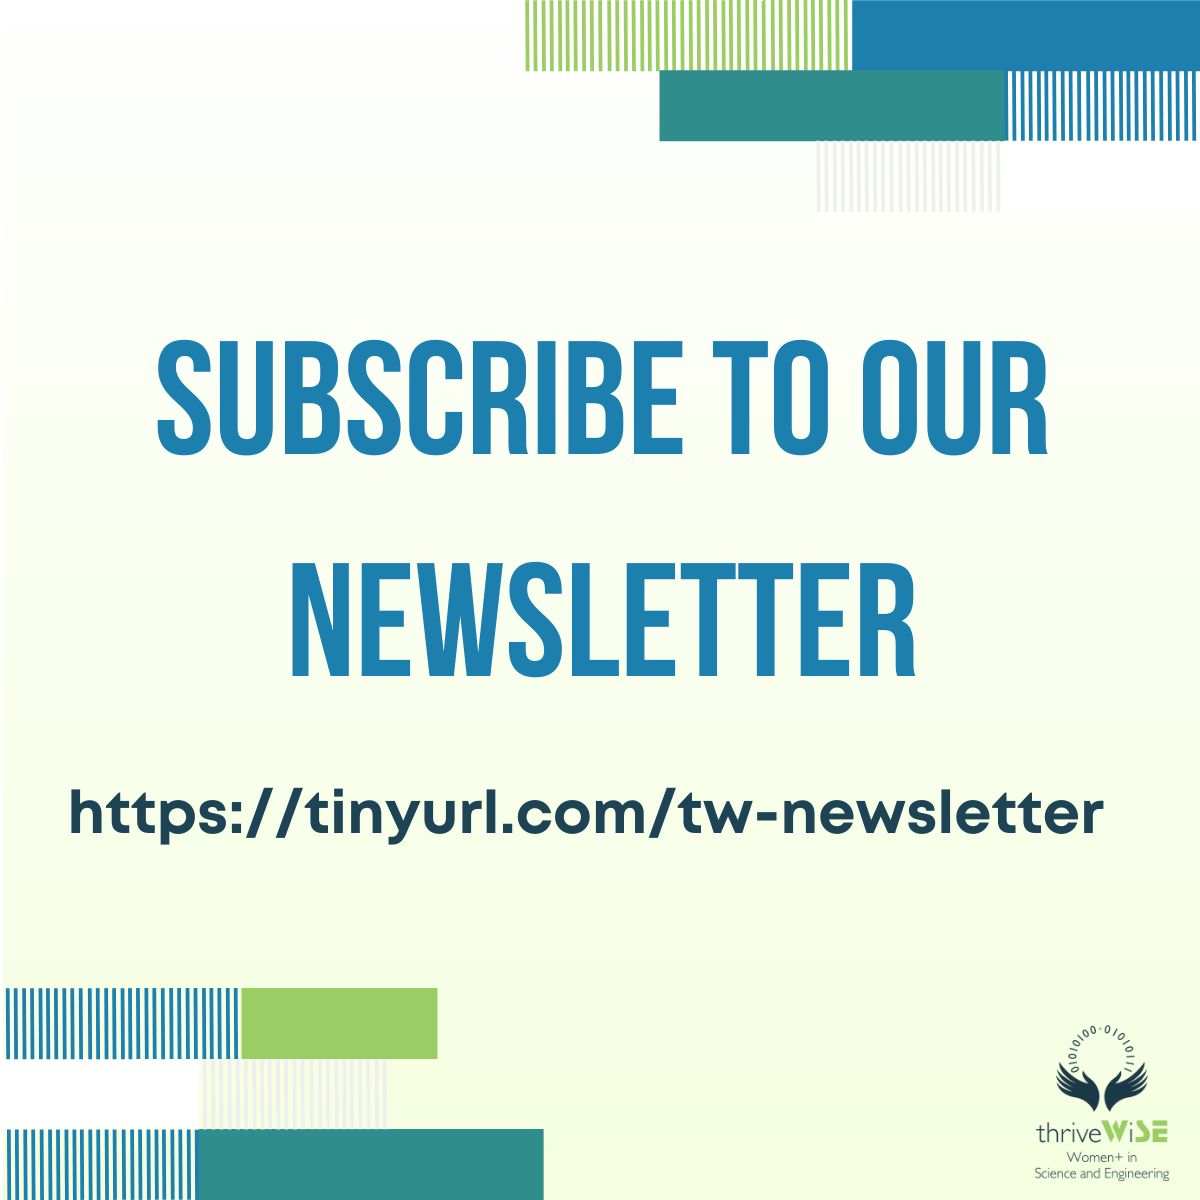 Don't miss our monthly newsletter coming out this week!

Make sure to subscribe and stay up-to-date on the latest information: 
tinyurl.com/TW-newsletter

#thrive-wise #memberspotlight #womeninscience #womeninengineer #engineering